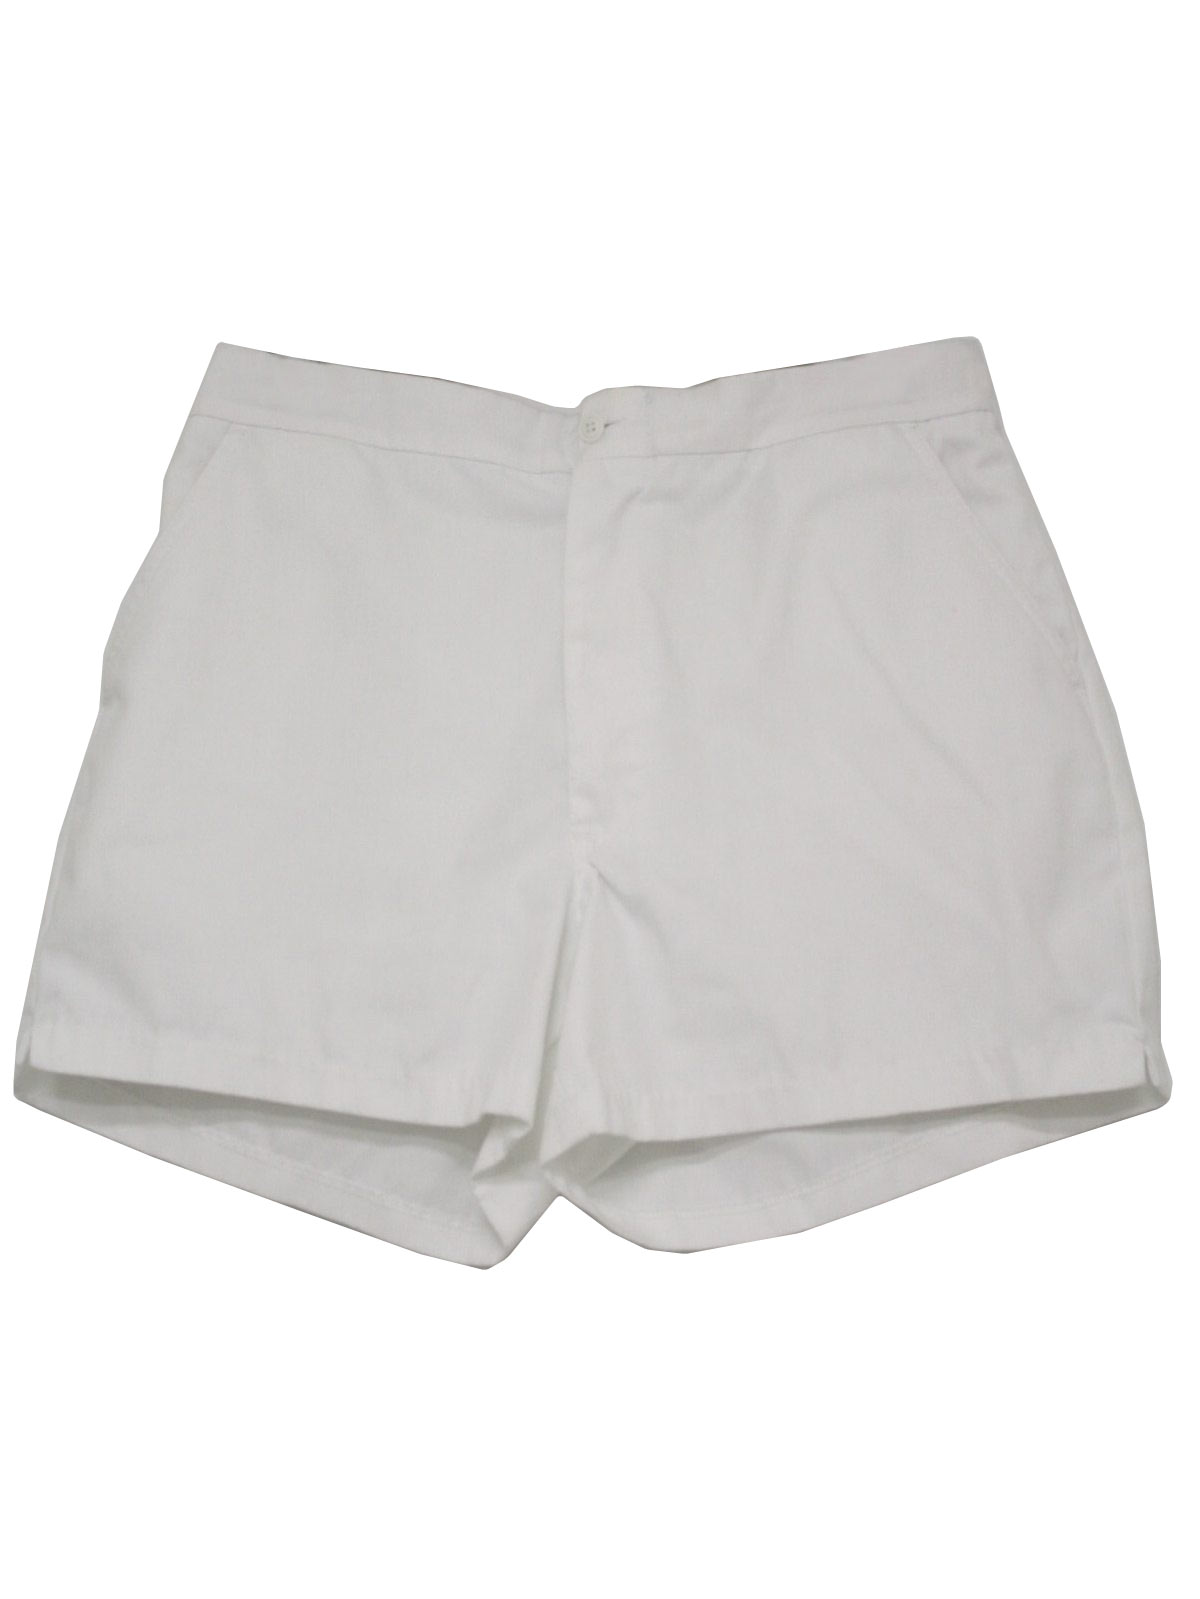 Eighties Vintage Shorts: 80s -Arnold Palmer- Mens white polyester ...